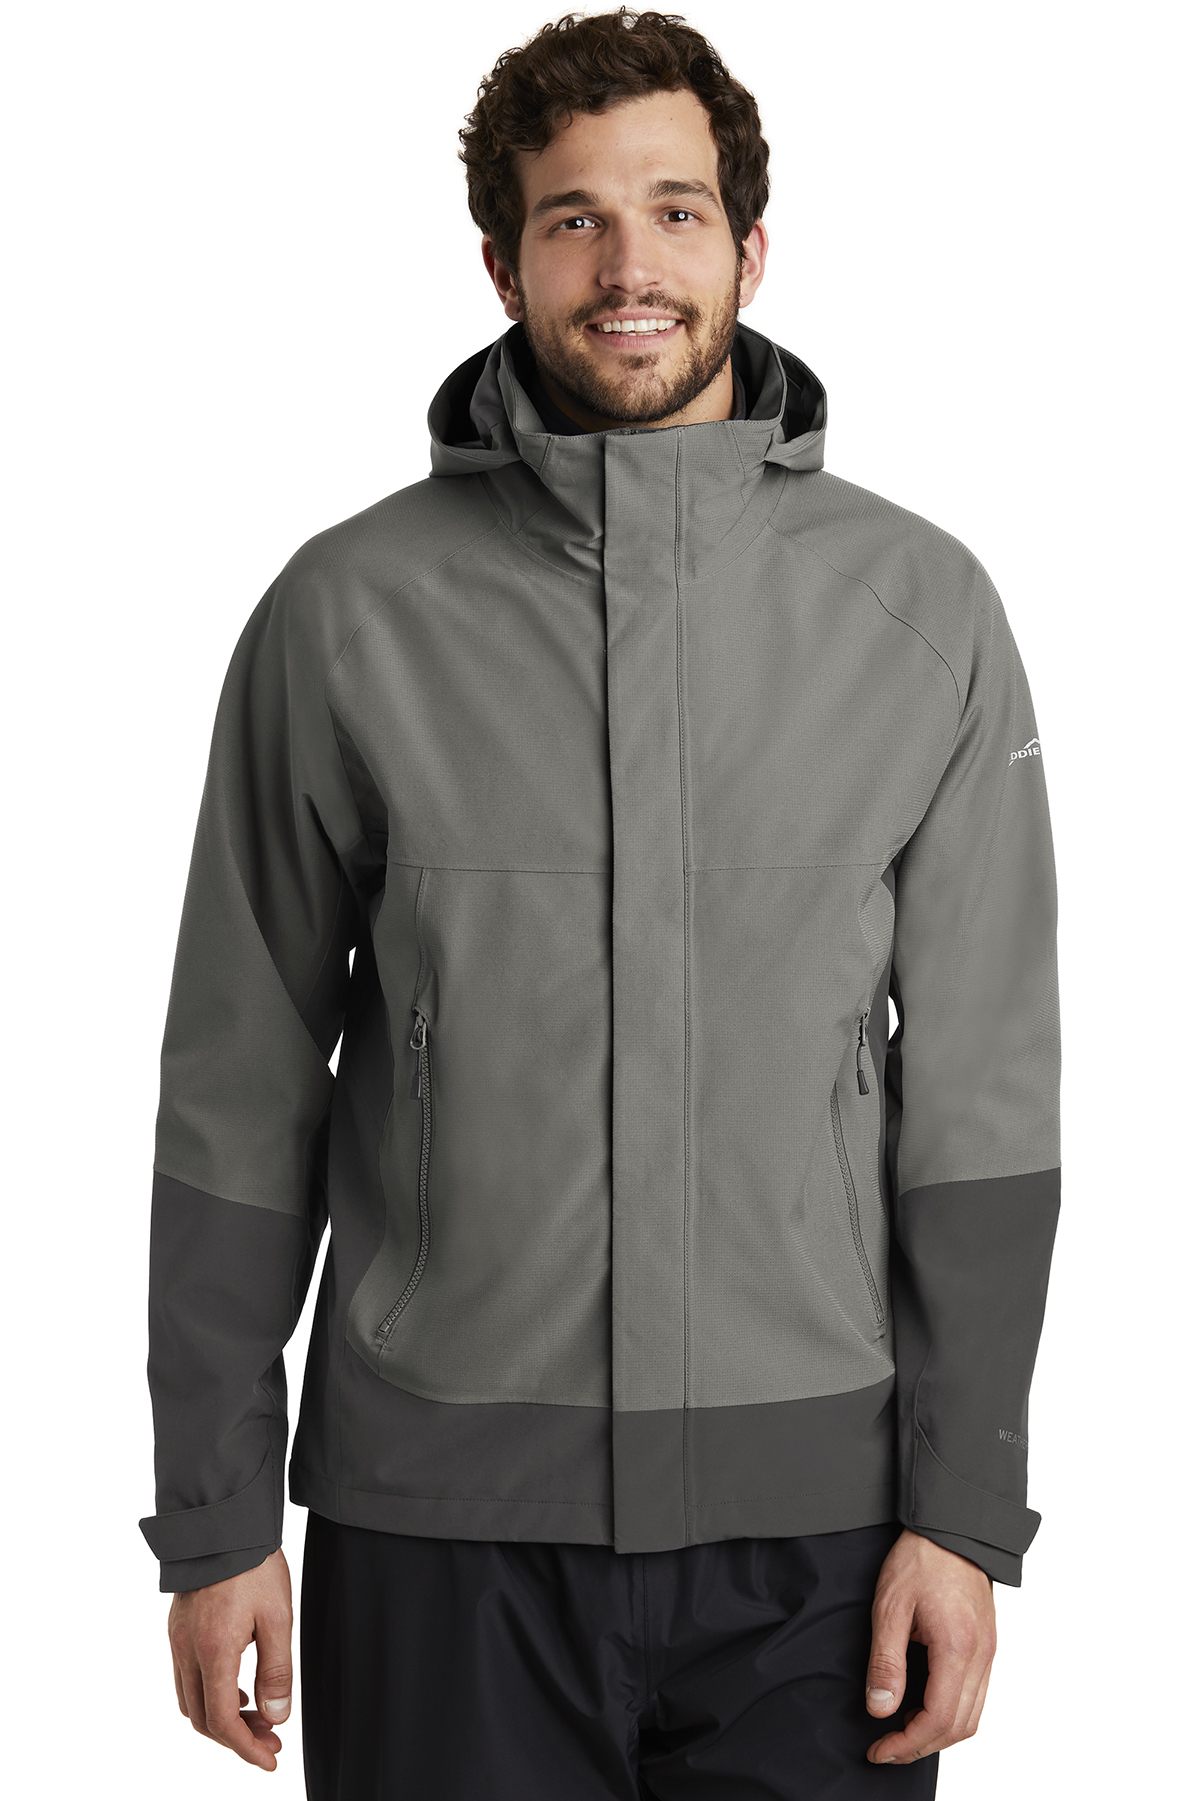 Eddie Bauer WeatherEdge Jacket | Product | Company Casuals